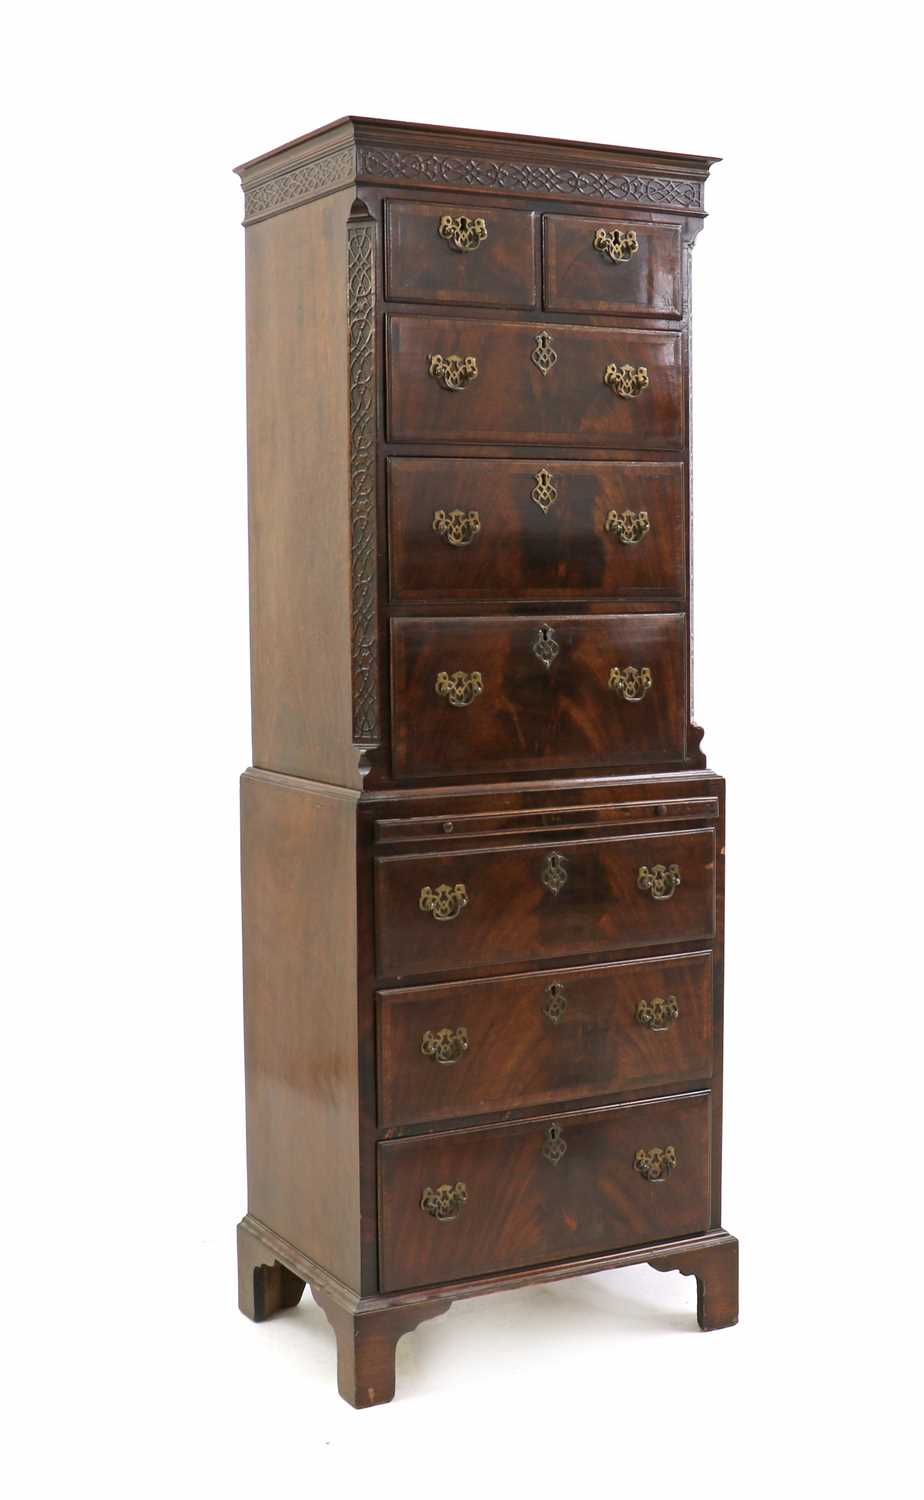 A George III style mahogany chest on chest